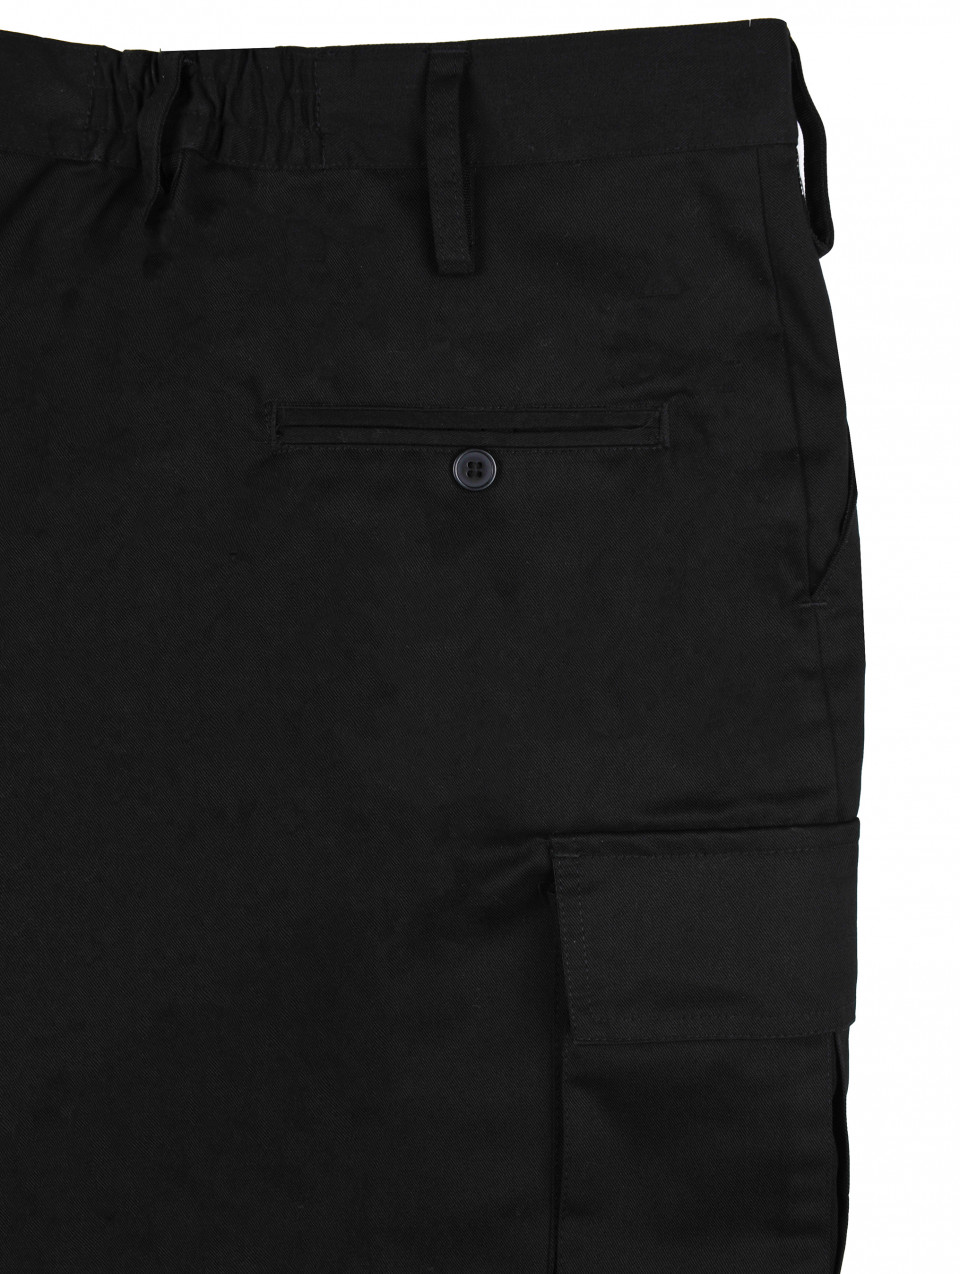 Premier Combat Trousers with Extra Reinforcement